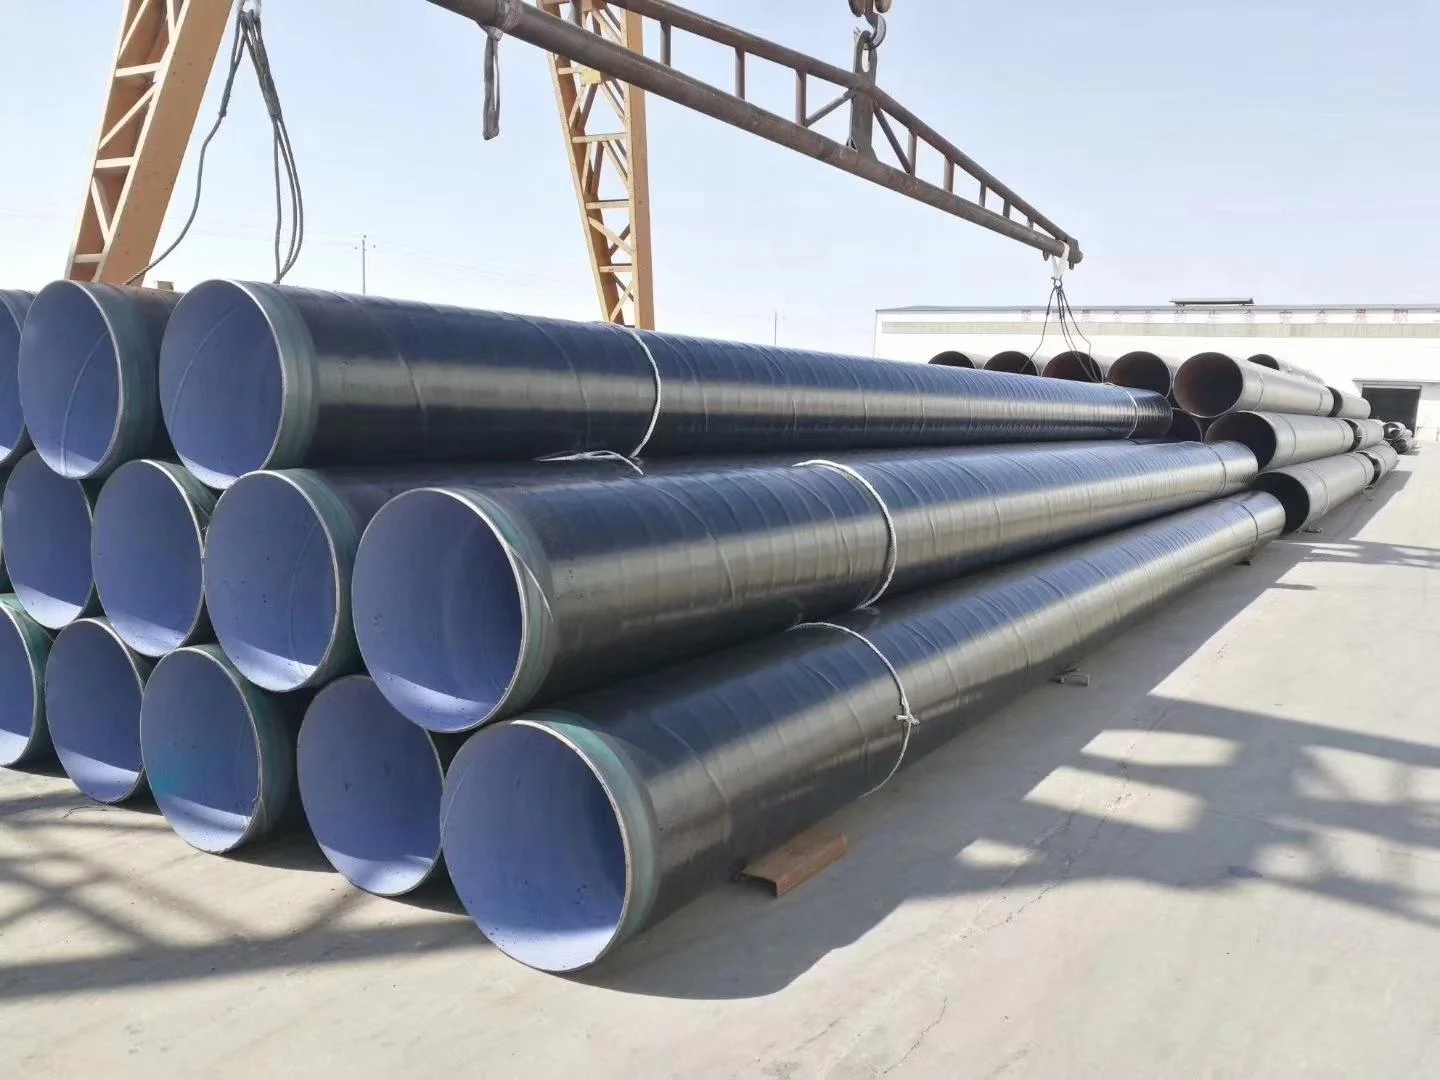 3PE anti-corrosion reinforced seamless steel pipe for industrial pipelines